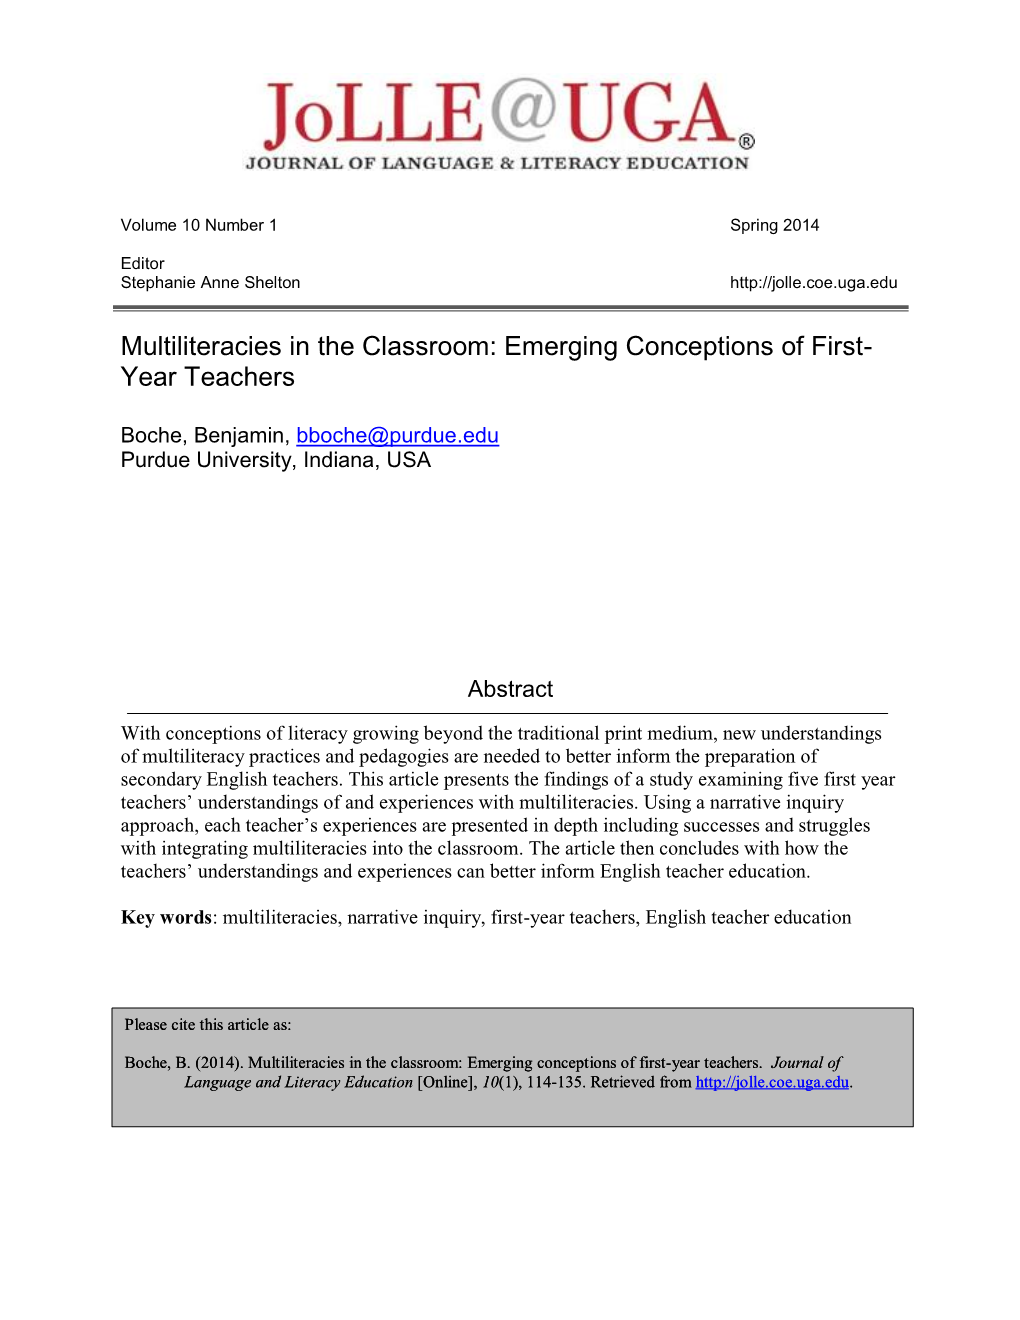 Multiliteracies in the Classroom: Emerging Conceptions of First- Year Teachers